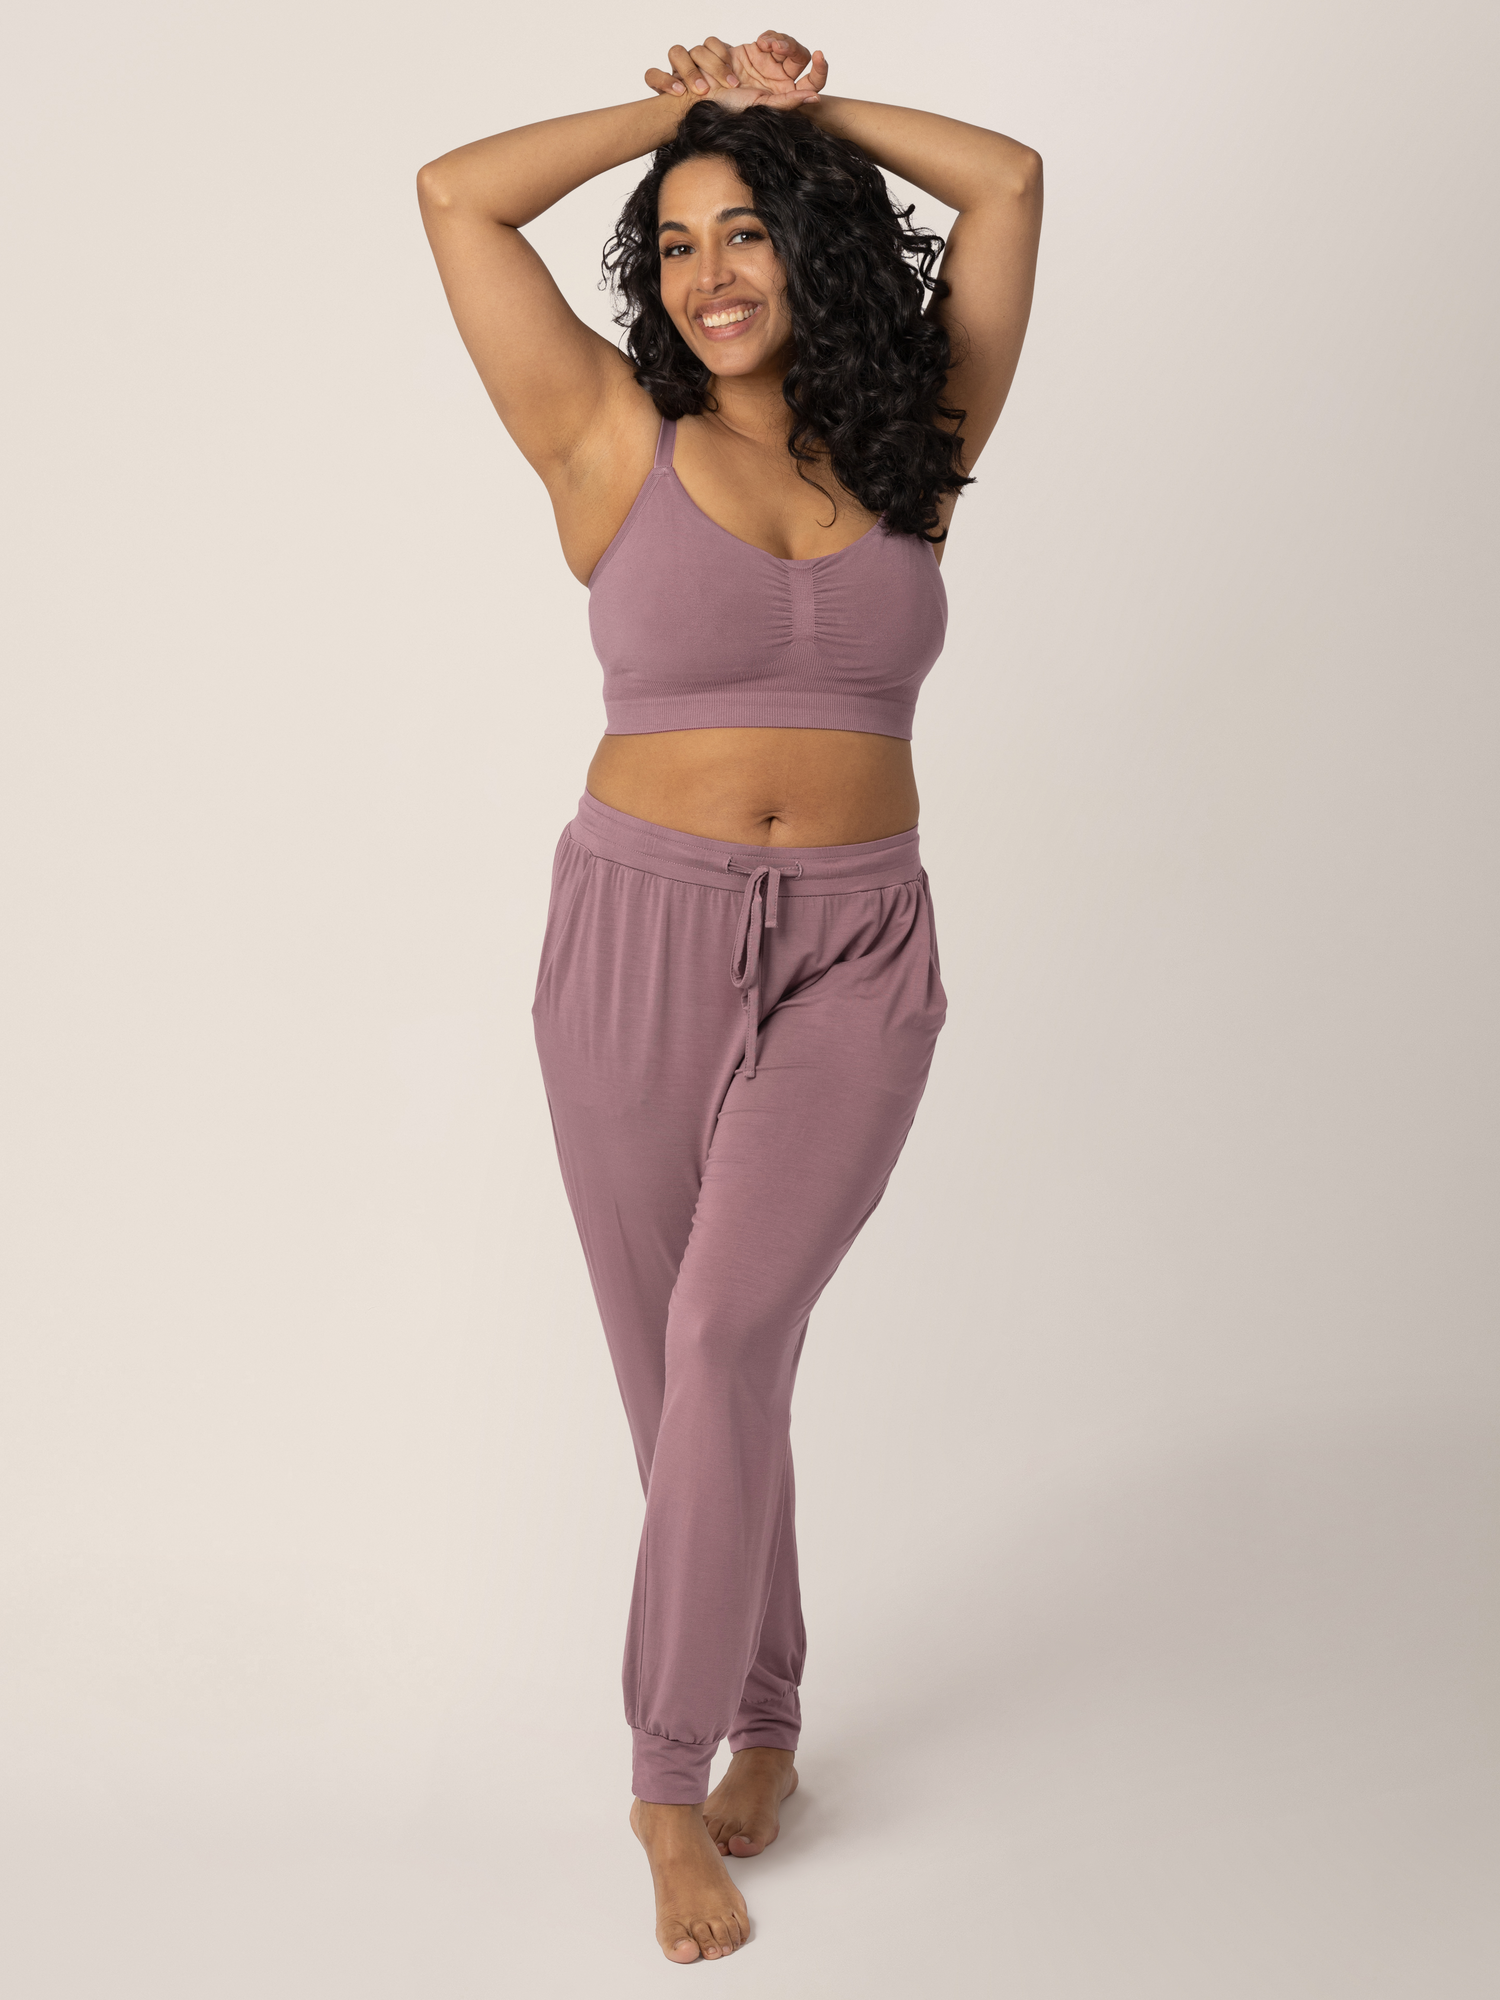 Model wearing the Sublime® Bamboo Hands-Free Pumping Lounge & Sleep Bra in Twilight 